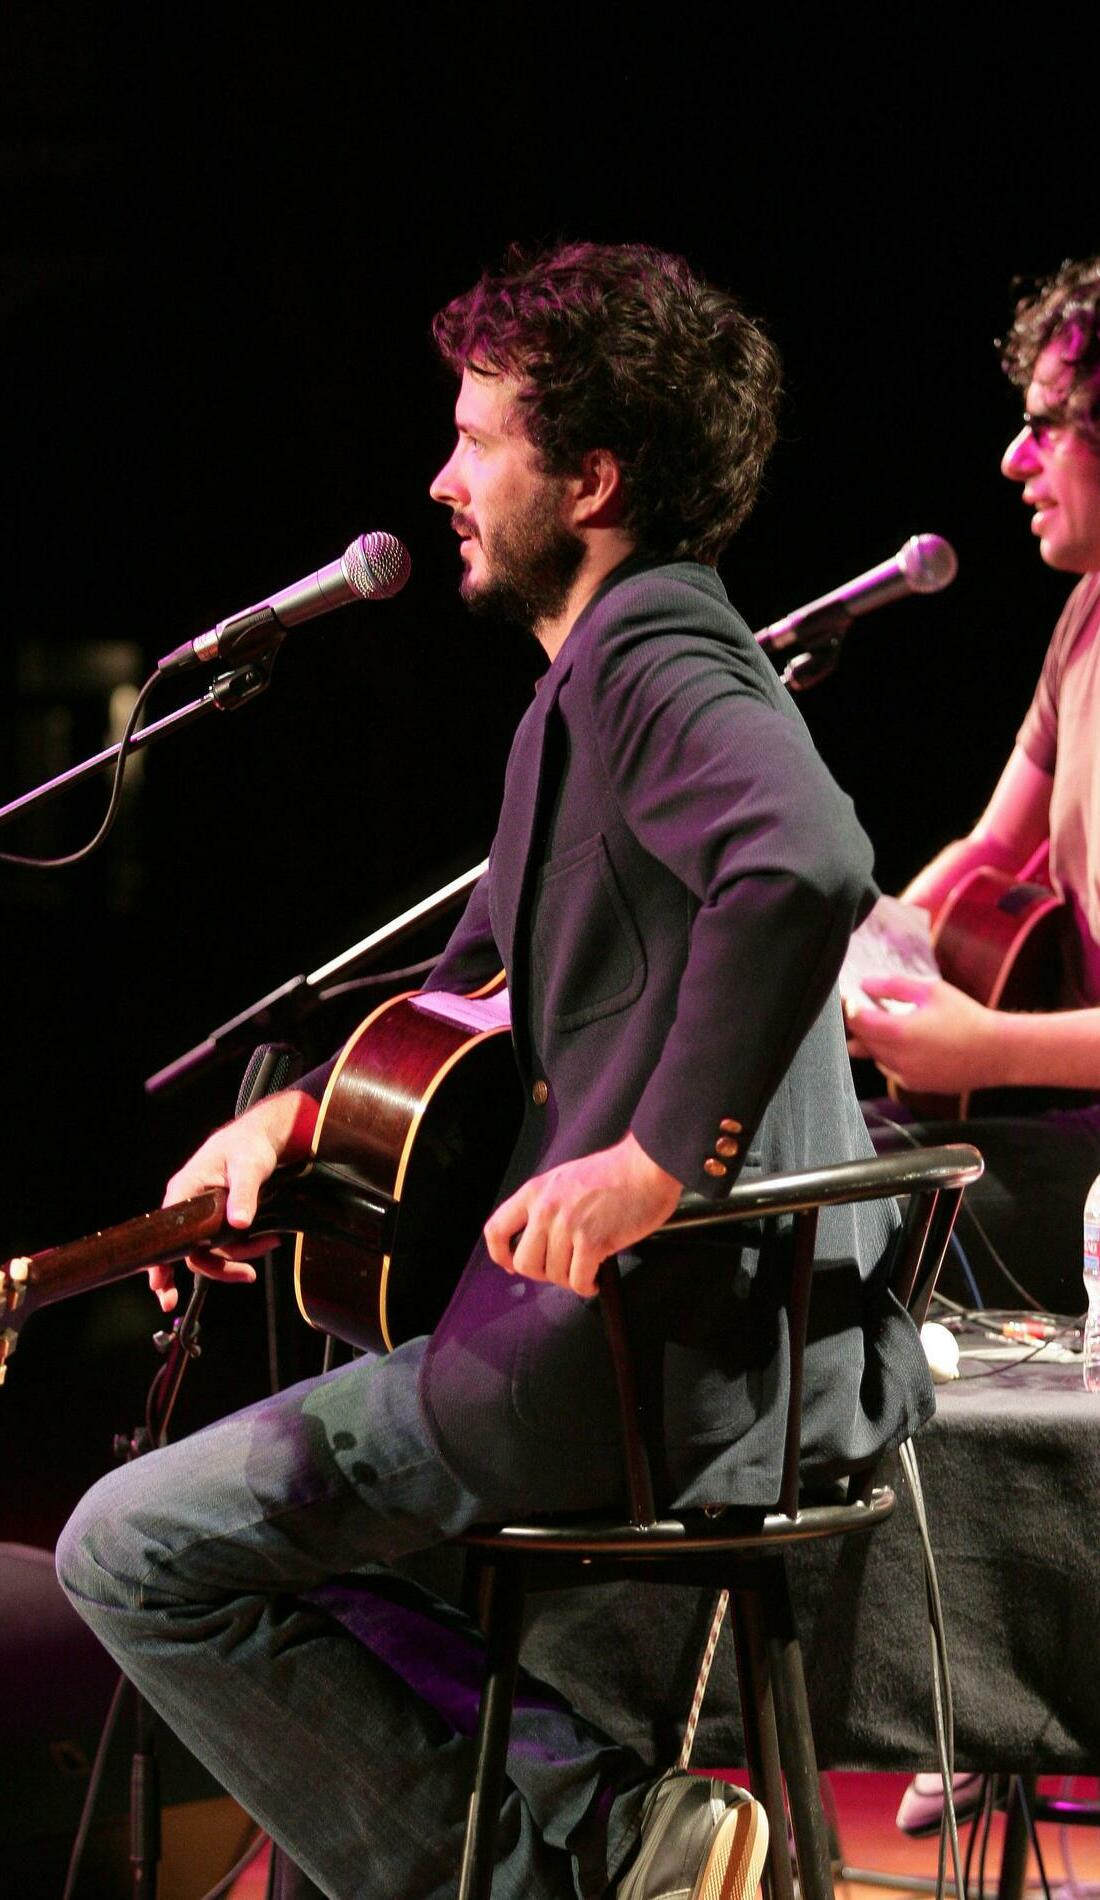 A Flight of the Conchords live event